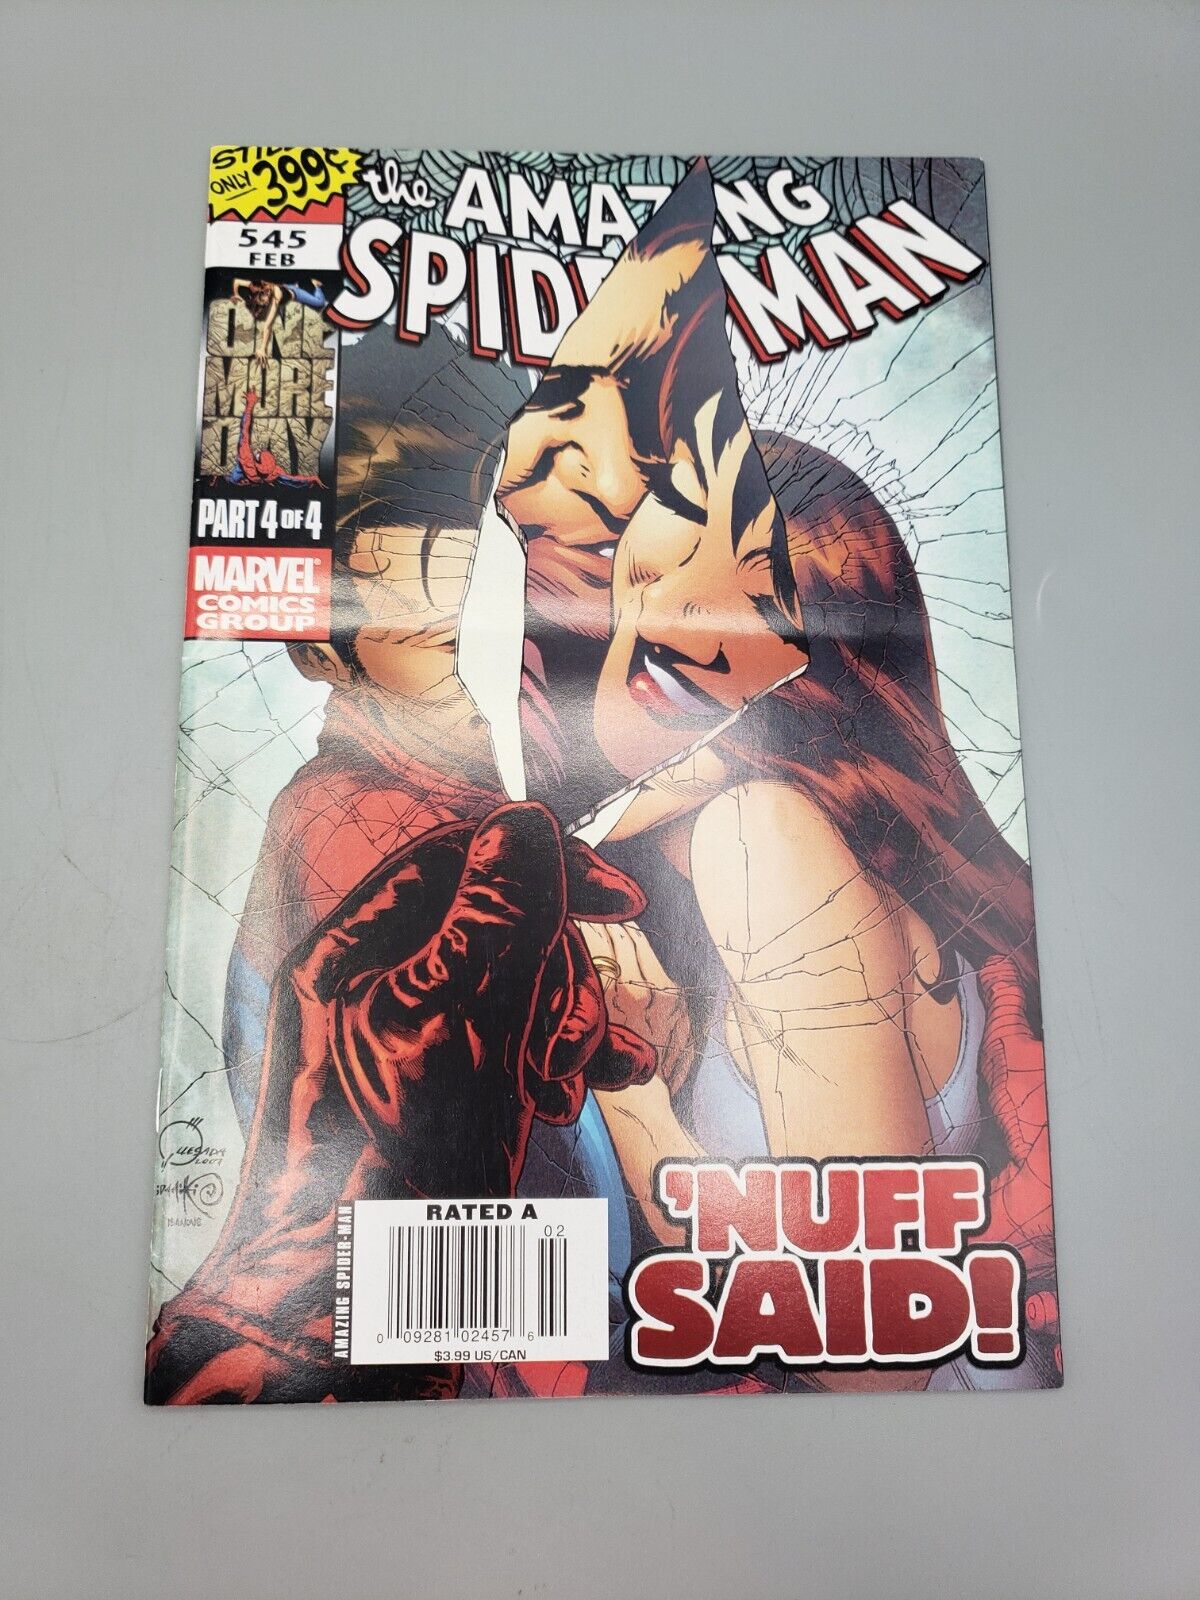 The Amazing Spider-Man One More Day Part 4 Vol 1 #545 2008 Newsstand Comic Book